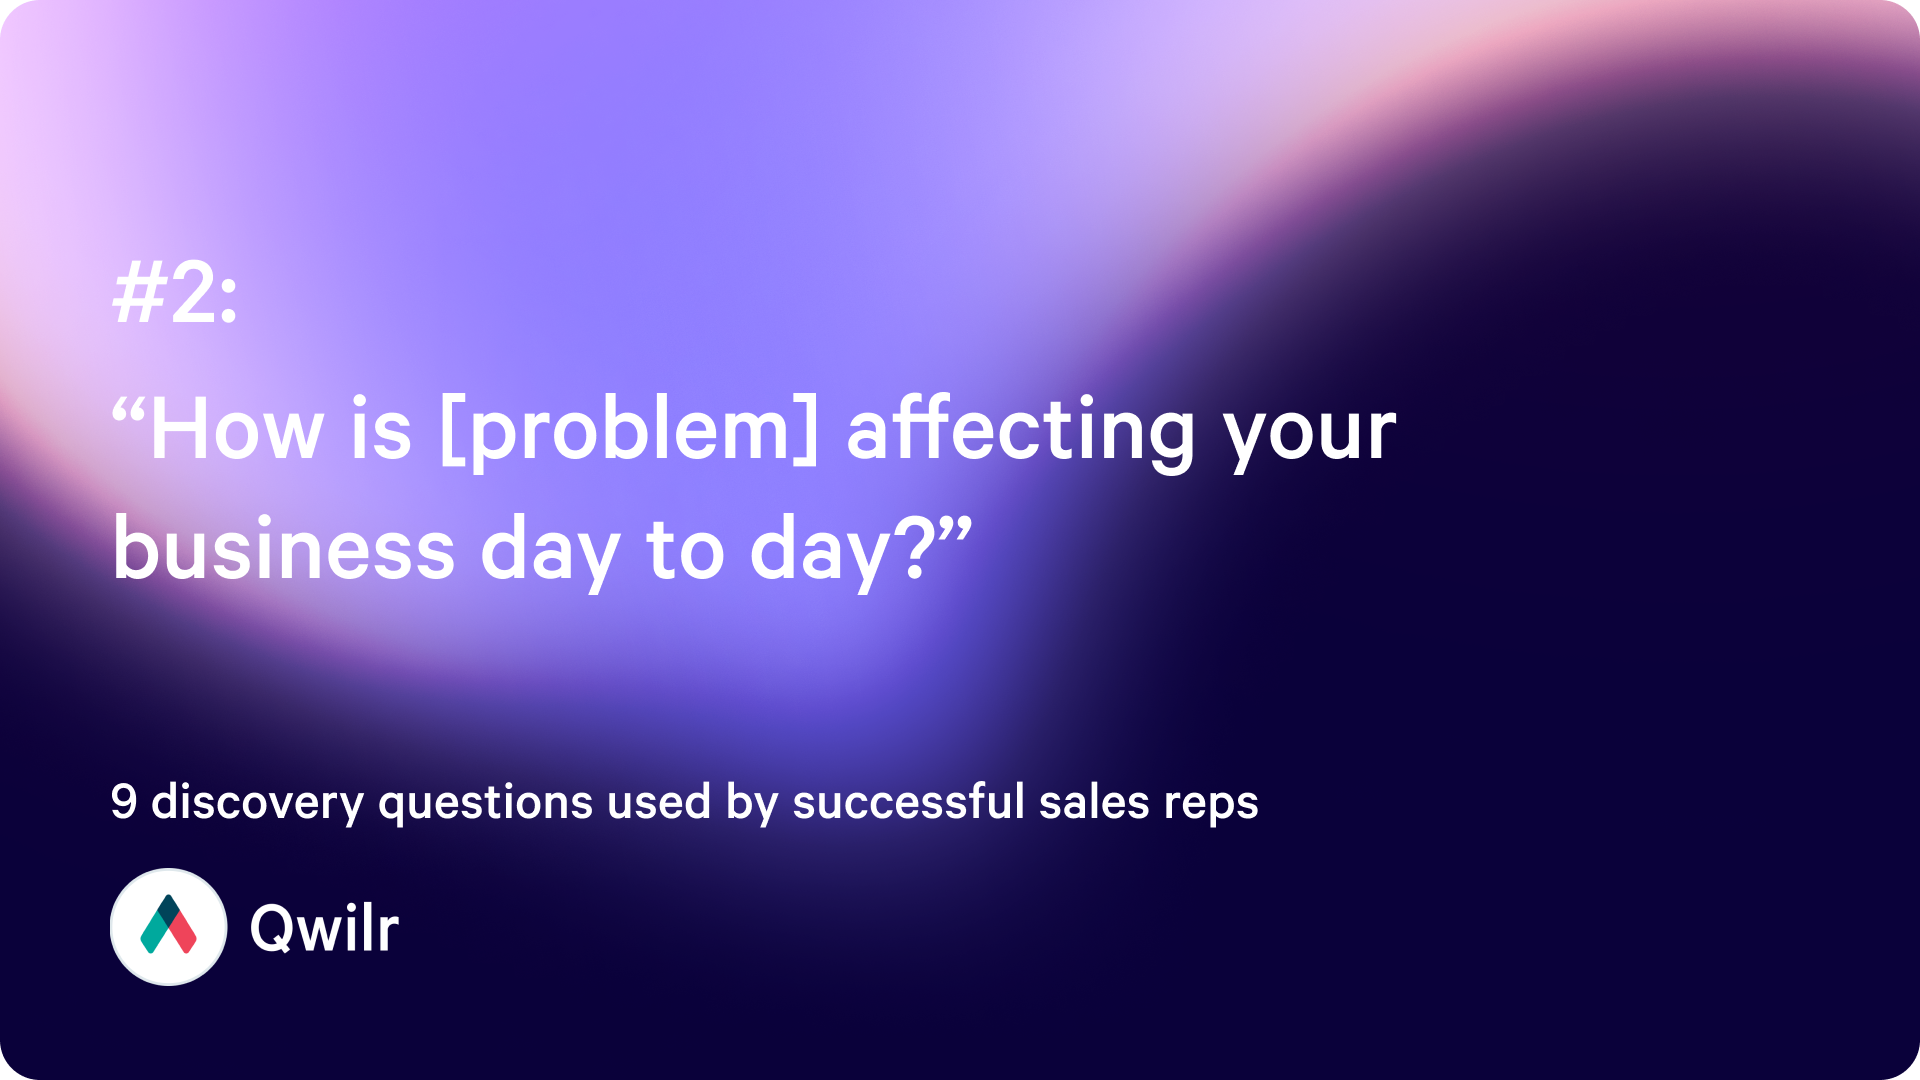 “How is [problem] affecting your business day to day?”